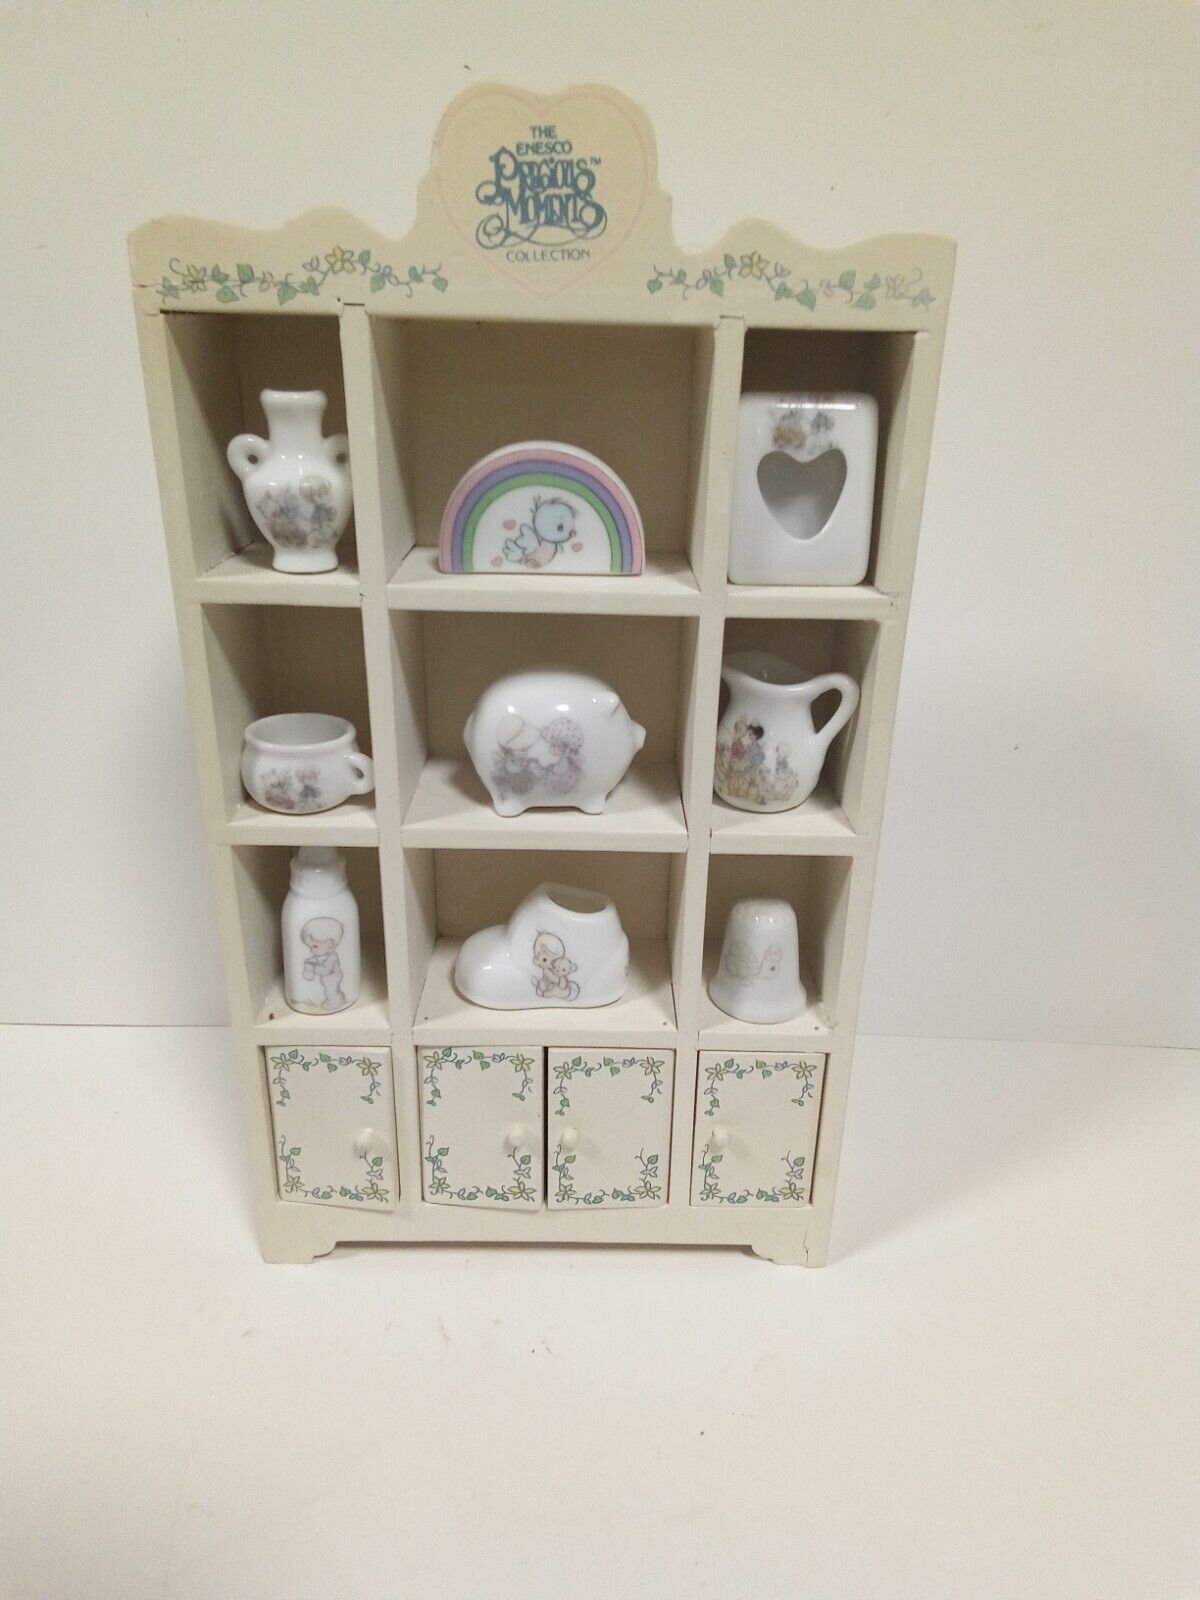 The Enesco Precious Moments Collection Pantry With Collectibles 1989 Samuel J 